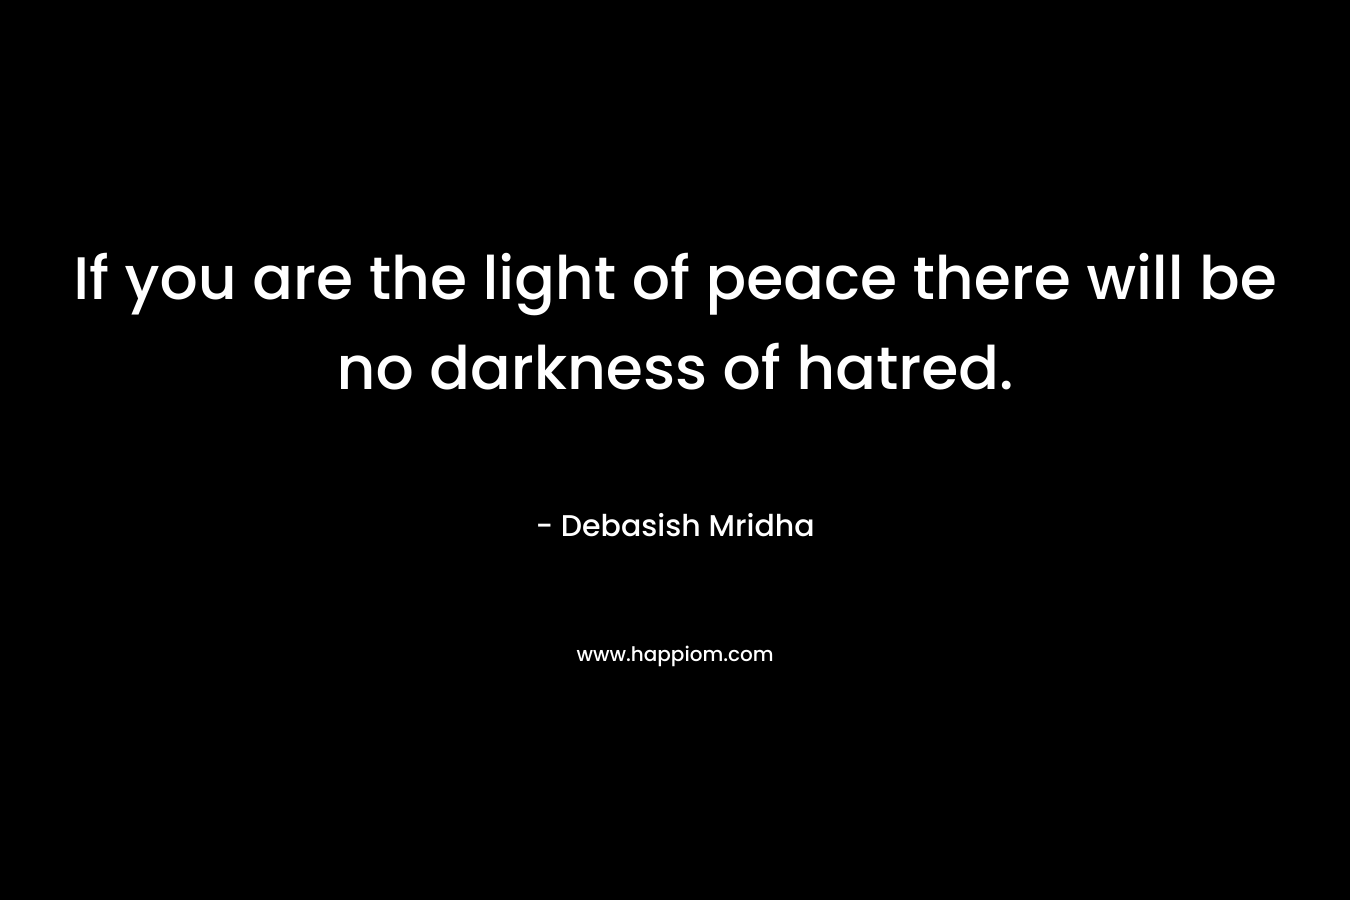 If you are the light of peace there will be no darkness of hatred.